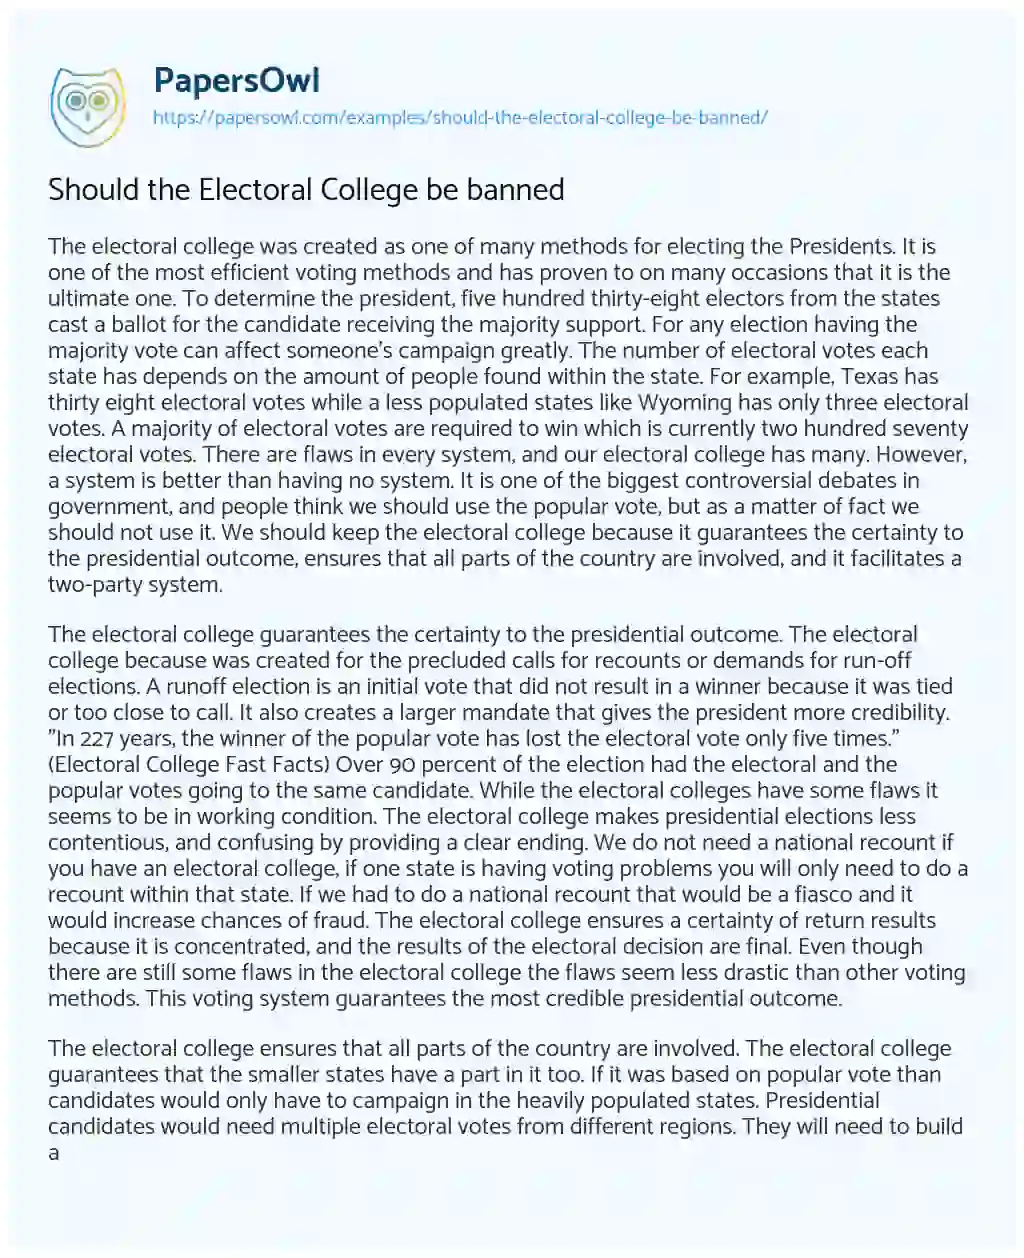 Essay on Should the Electoral College be Banned